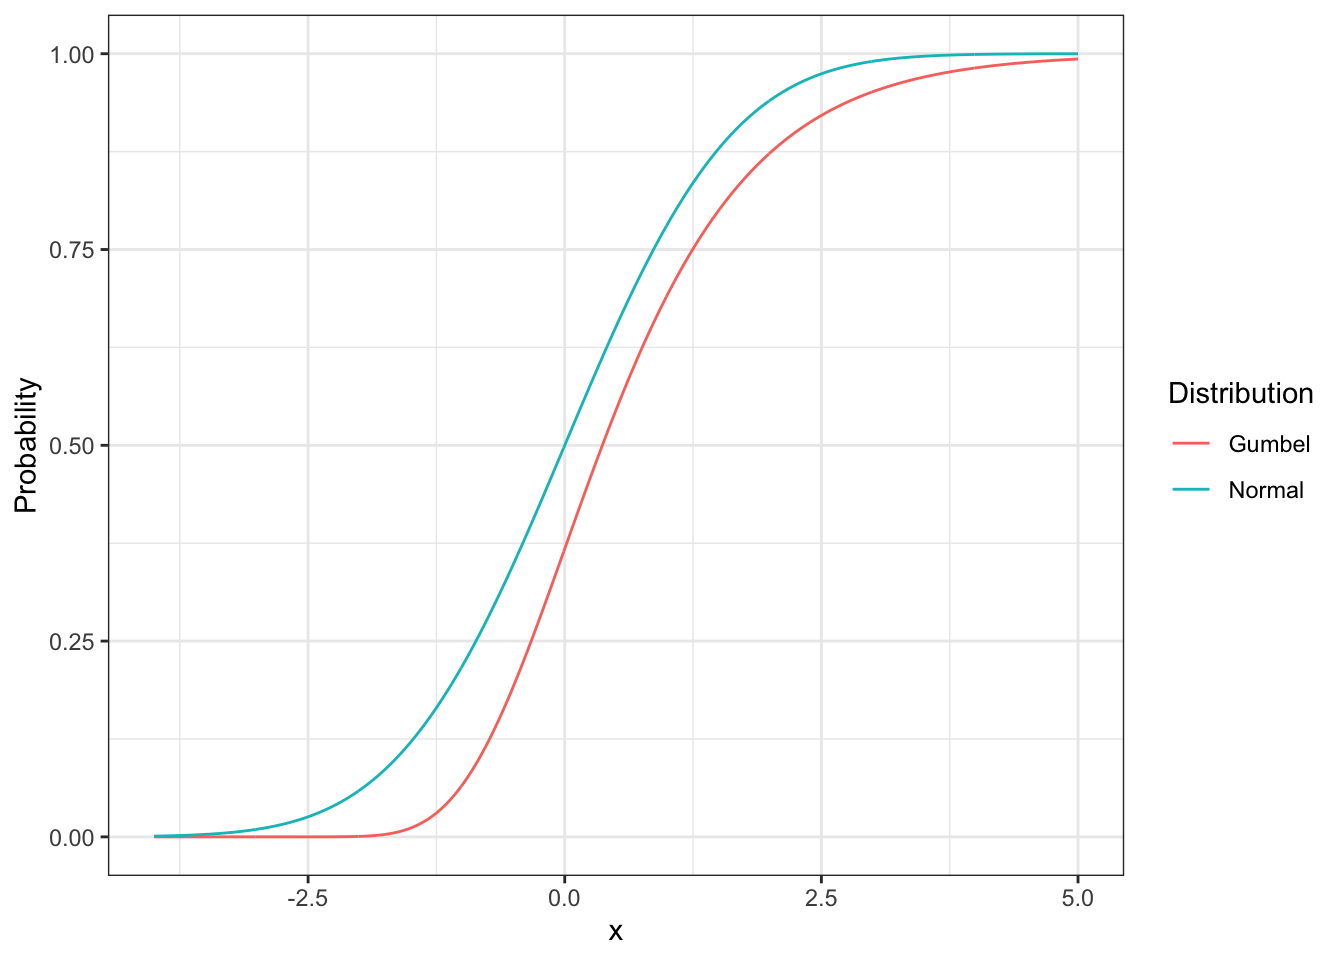 Cumulative density function for normal and Gumbel distributions.